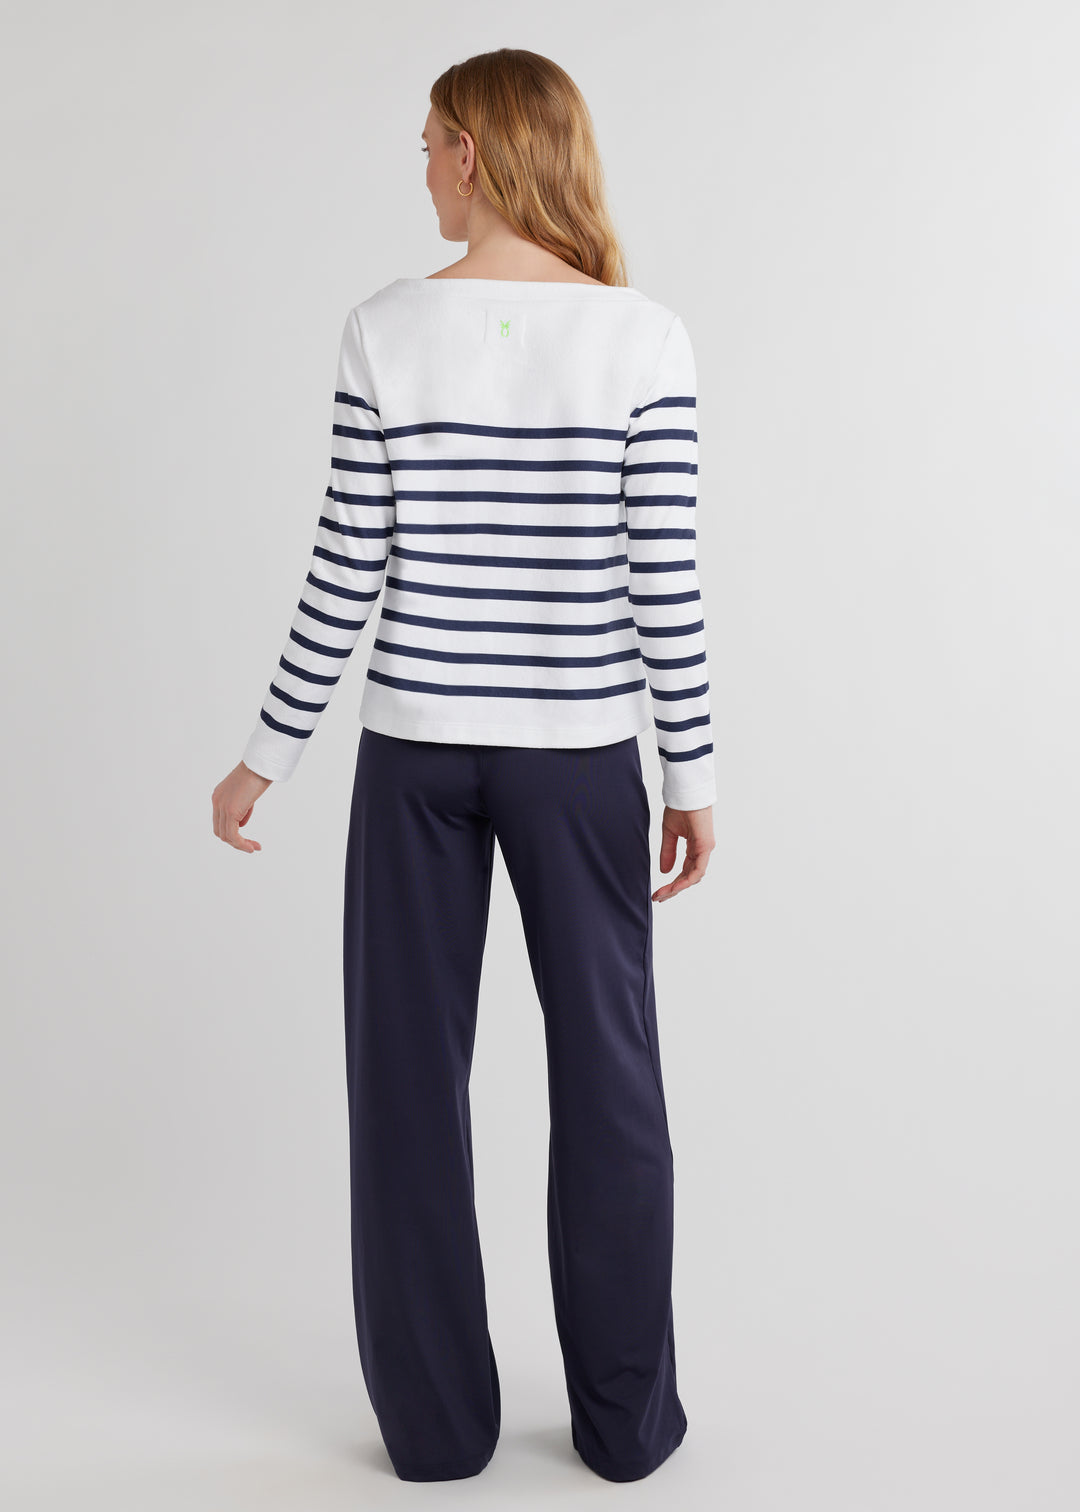 Saylor Boatneck in Terry Fleece (Navy/White Placed Stripe)